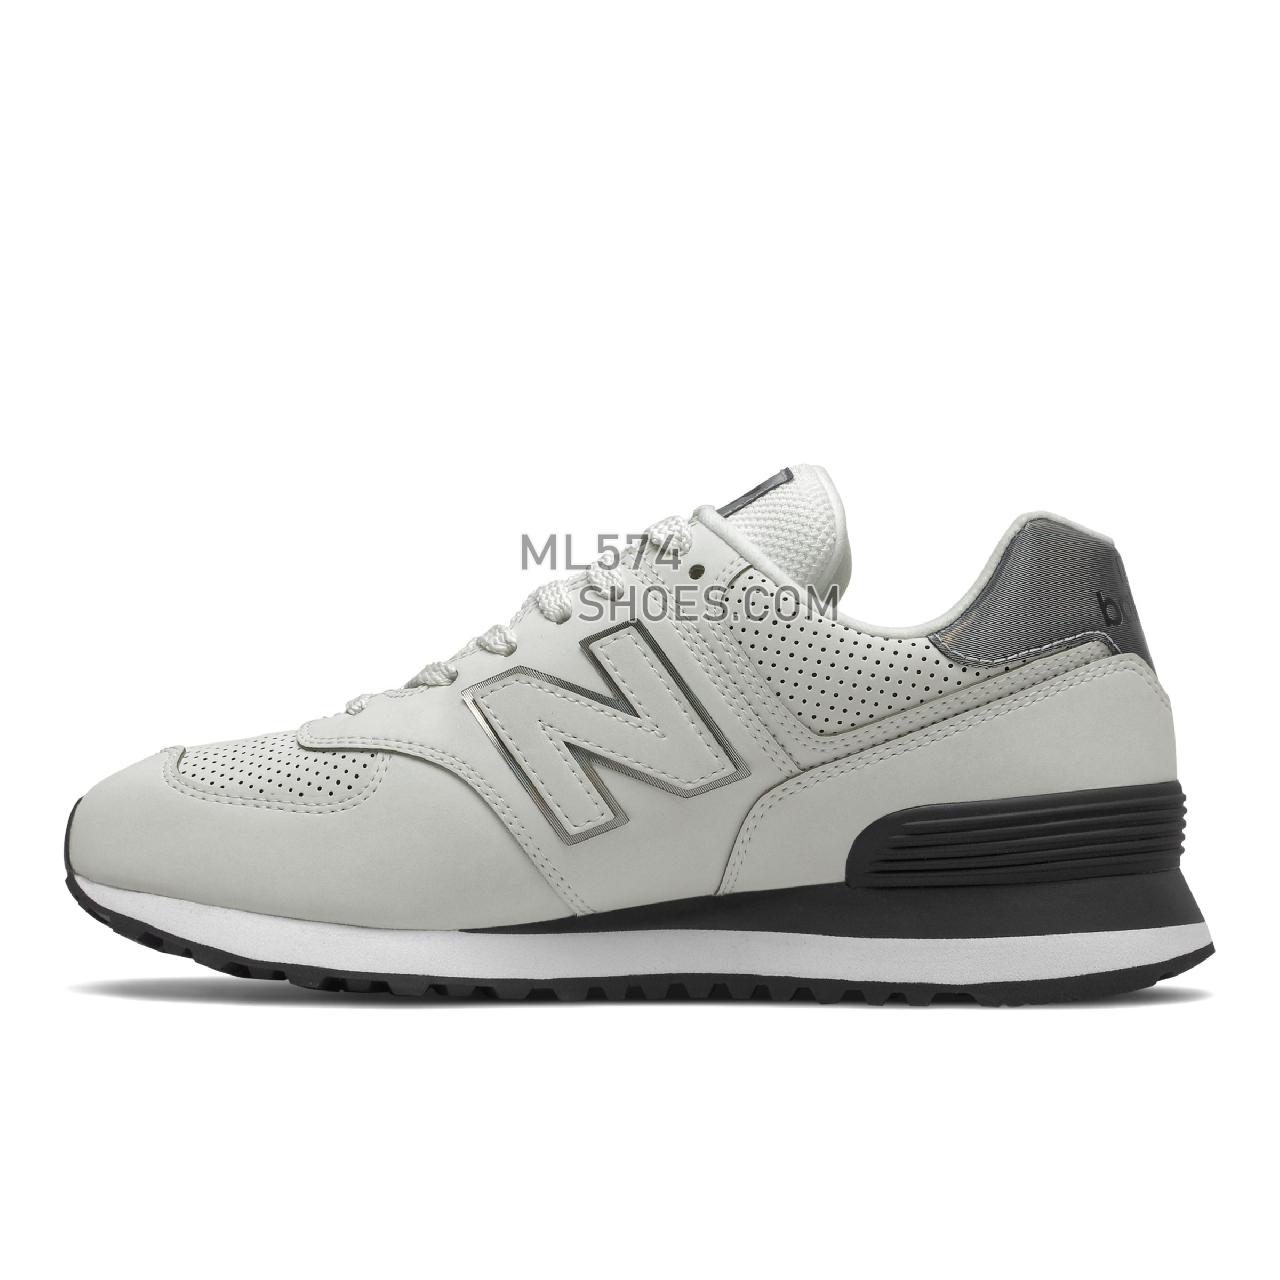 New Balance 574 - Women's Classic Sneakers - Grey with Black - WL574DN2